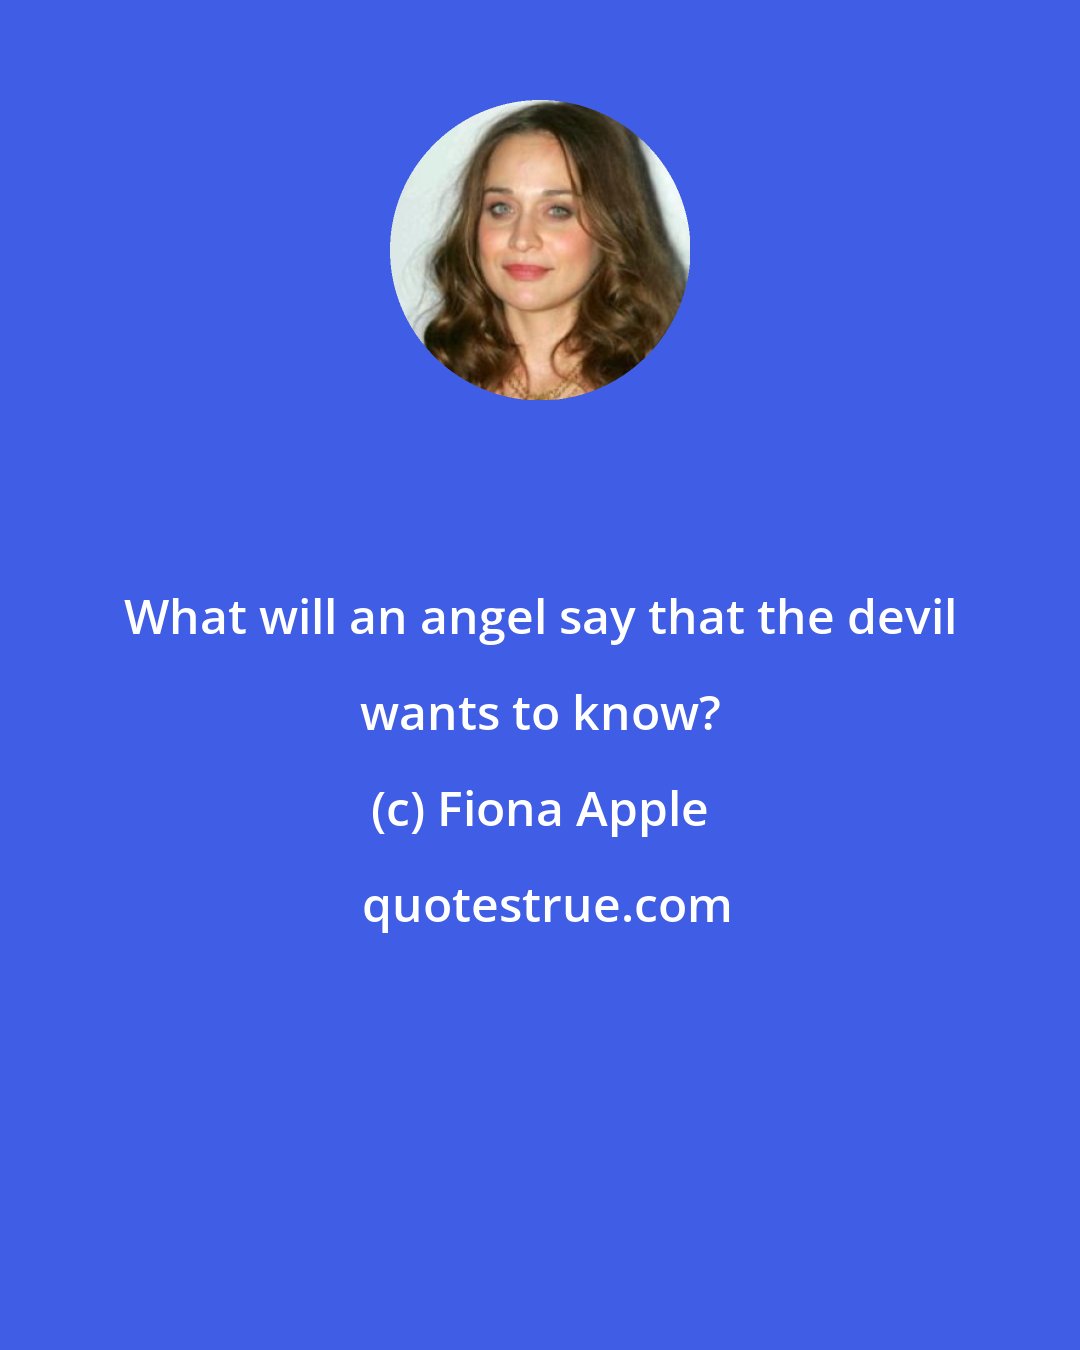 Fiona Apple: What will an angel say that the devil wants to know?